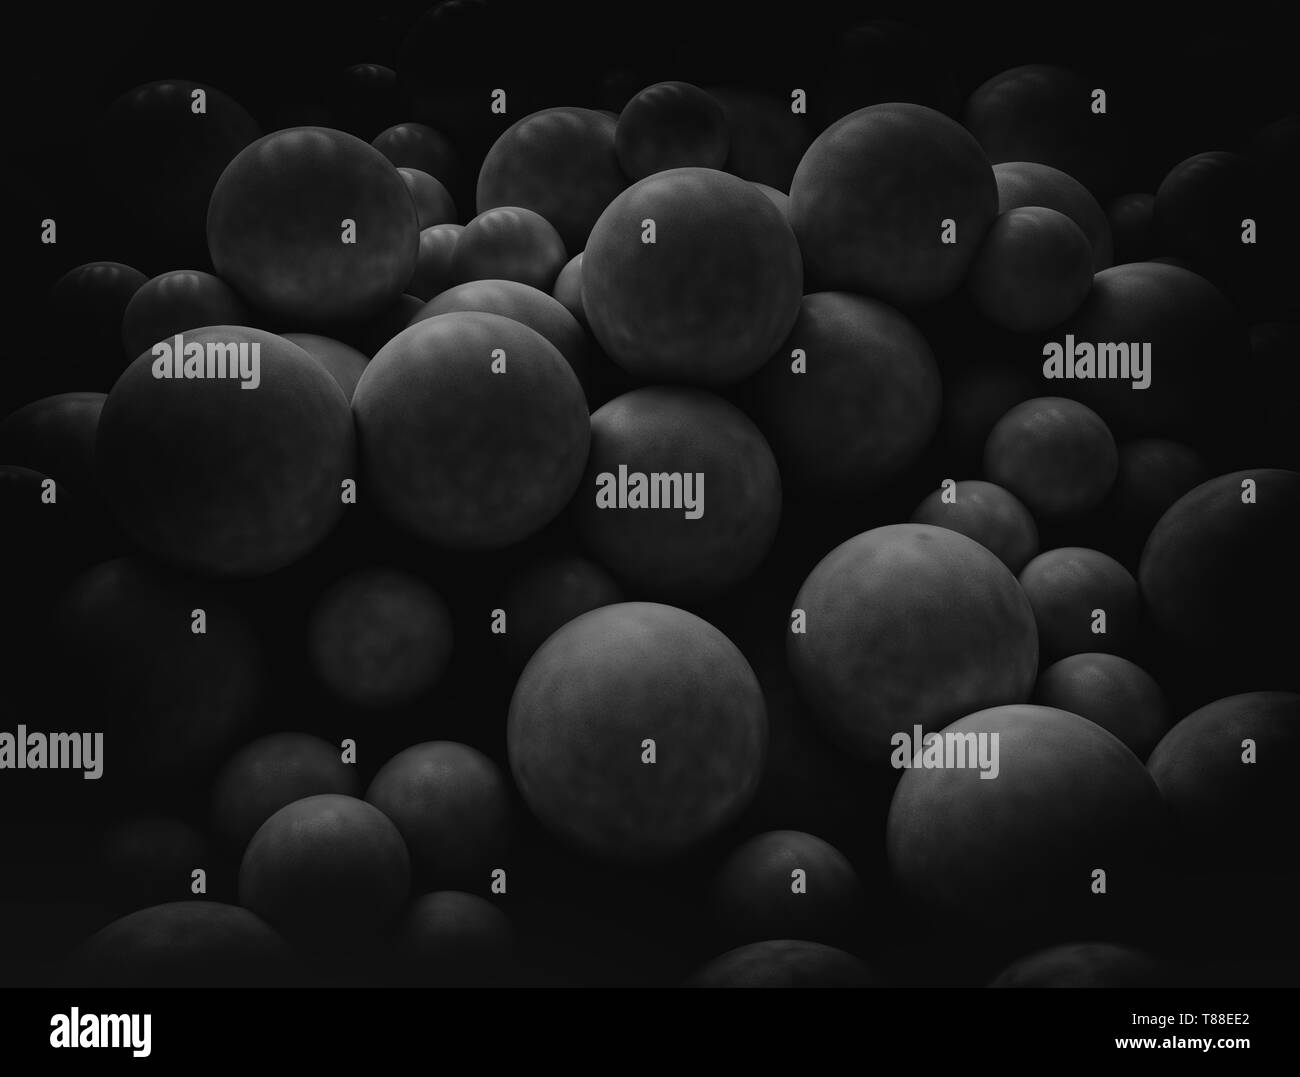 Abstract cluster of stone texture spheres or cells in the dark Stock Photo